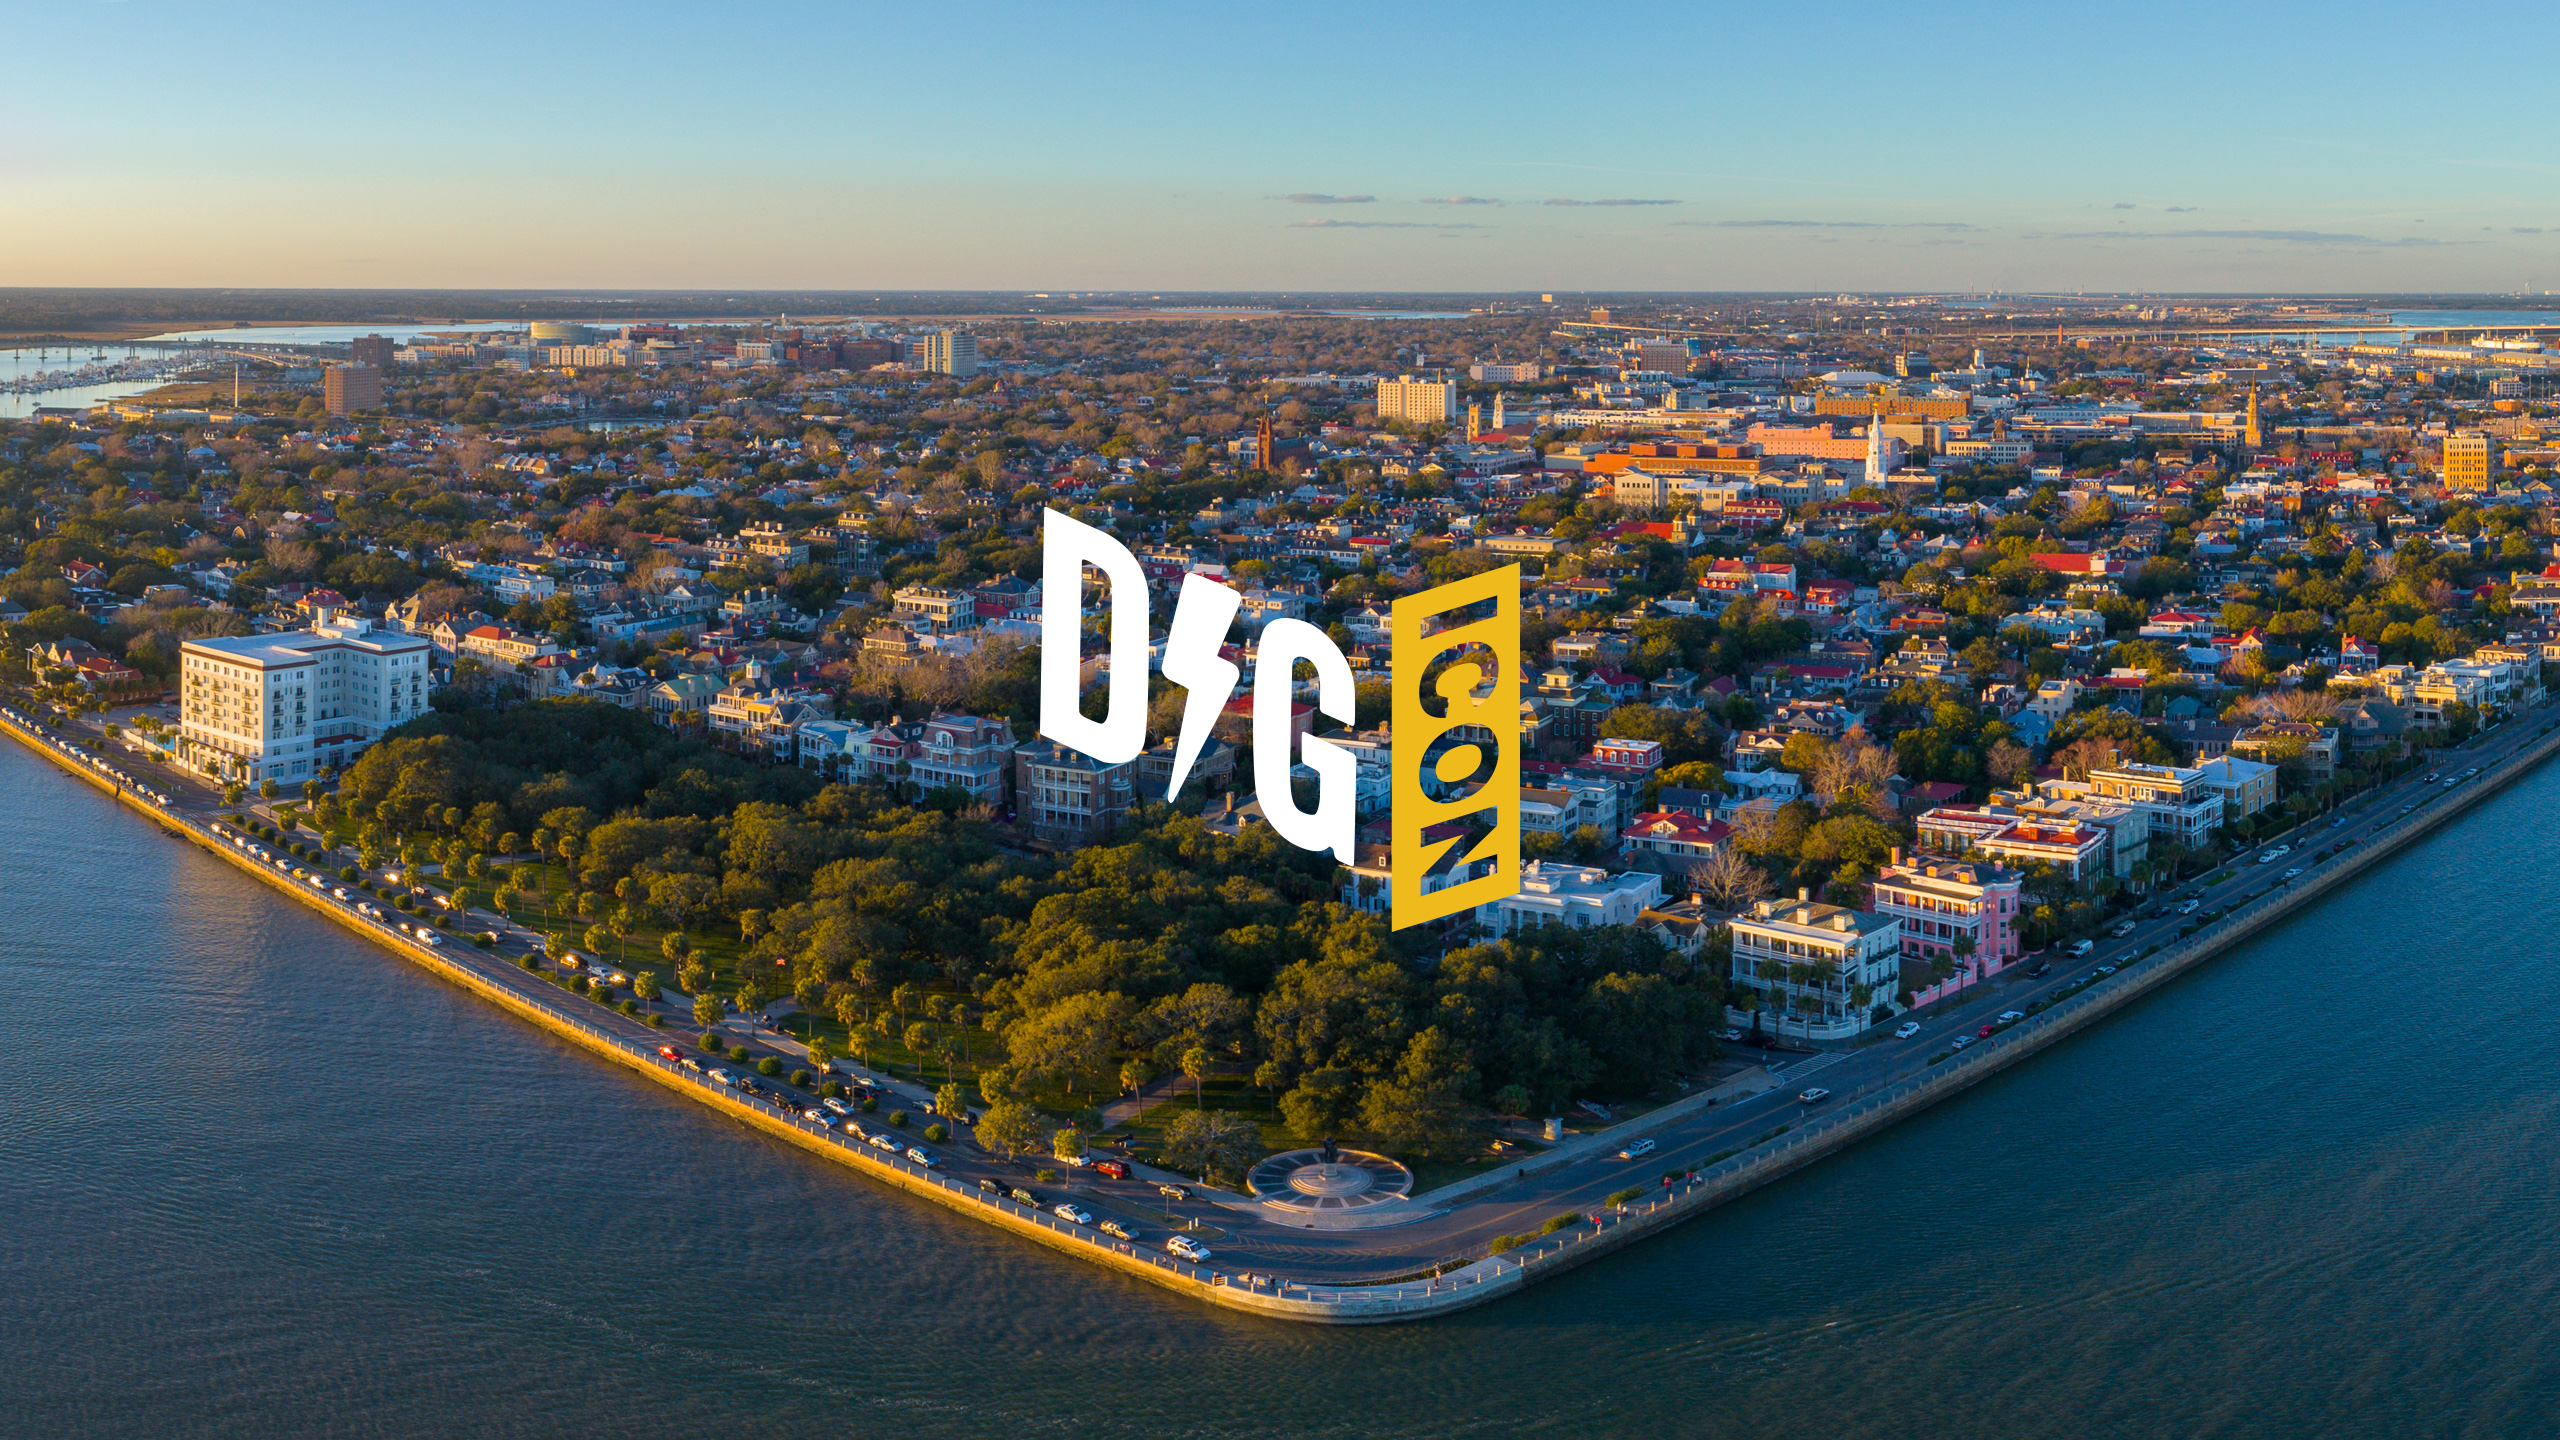 DIG SOUTH Unveils 2017 Speaker Lineup, Featuring 155 Top Executives, Entrepreneurs and Venture Capitalists